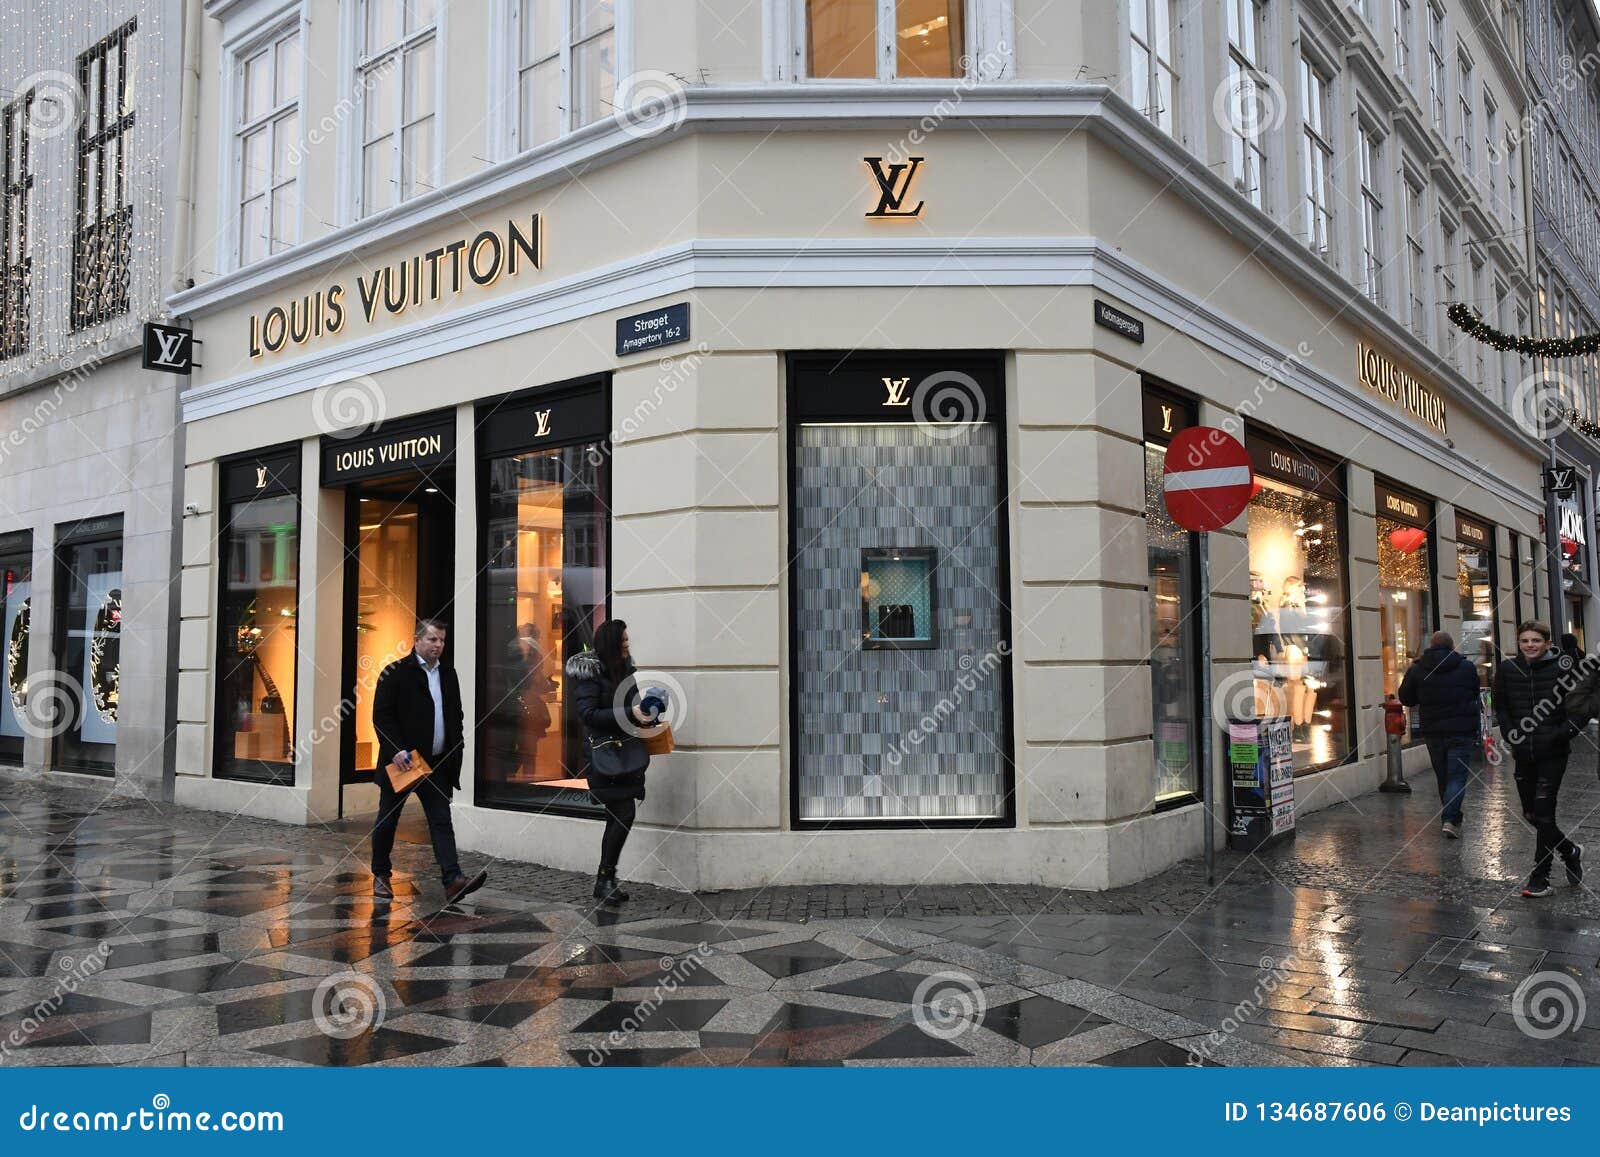 LOUIS VUITTON DECORATES with THIER ITEMS Editorial Photo - Image of business: 134687606